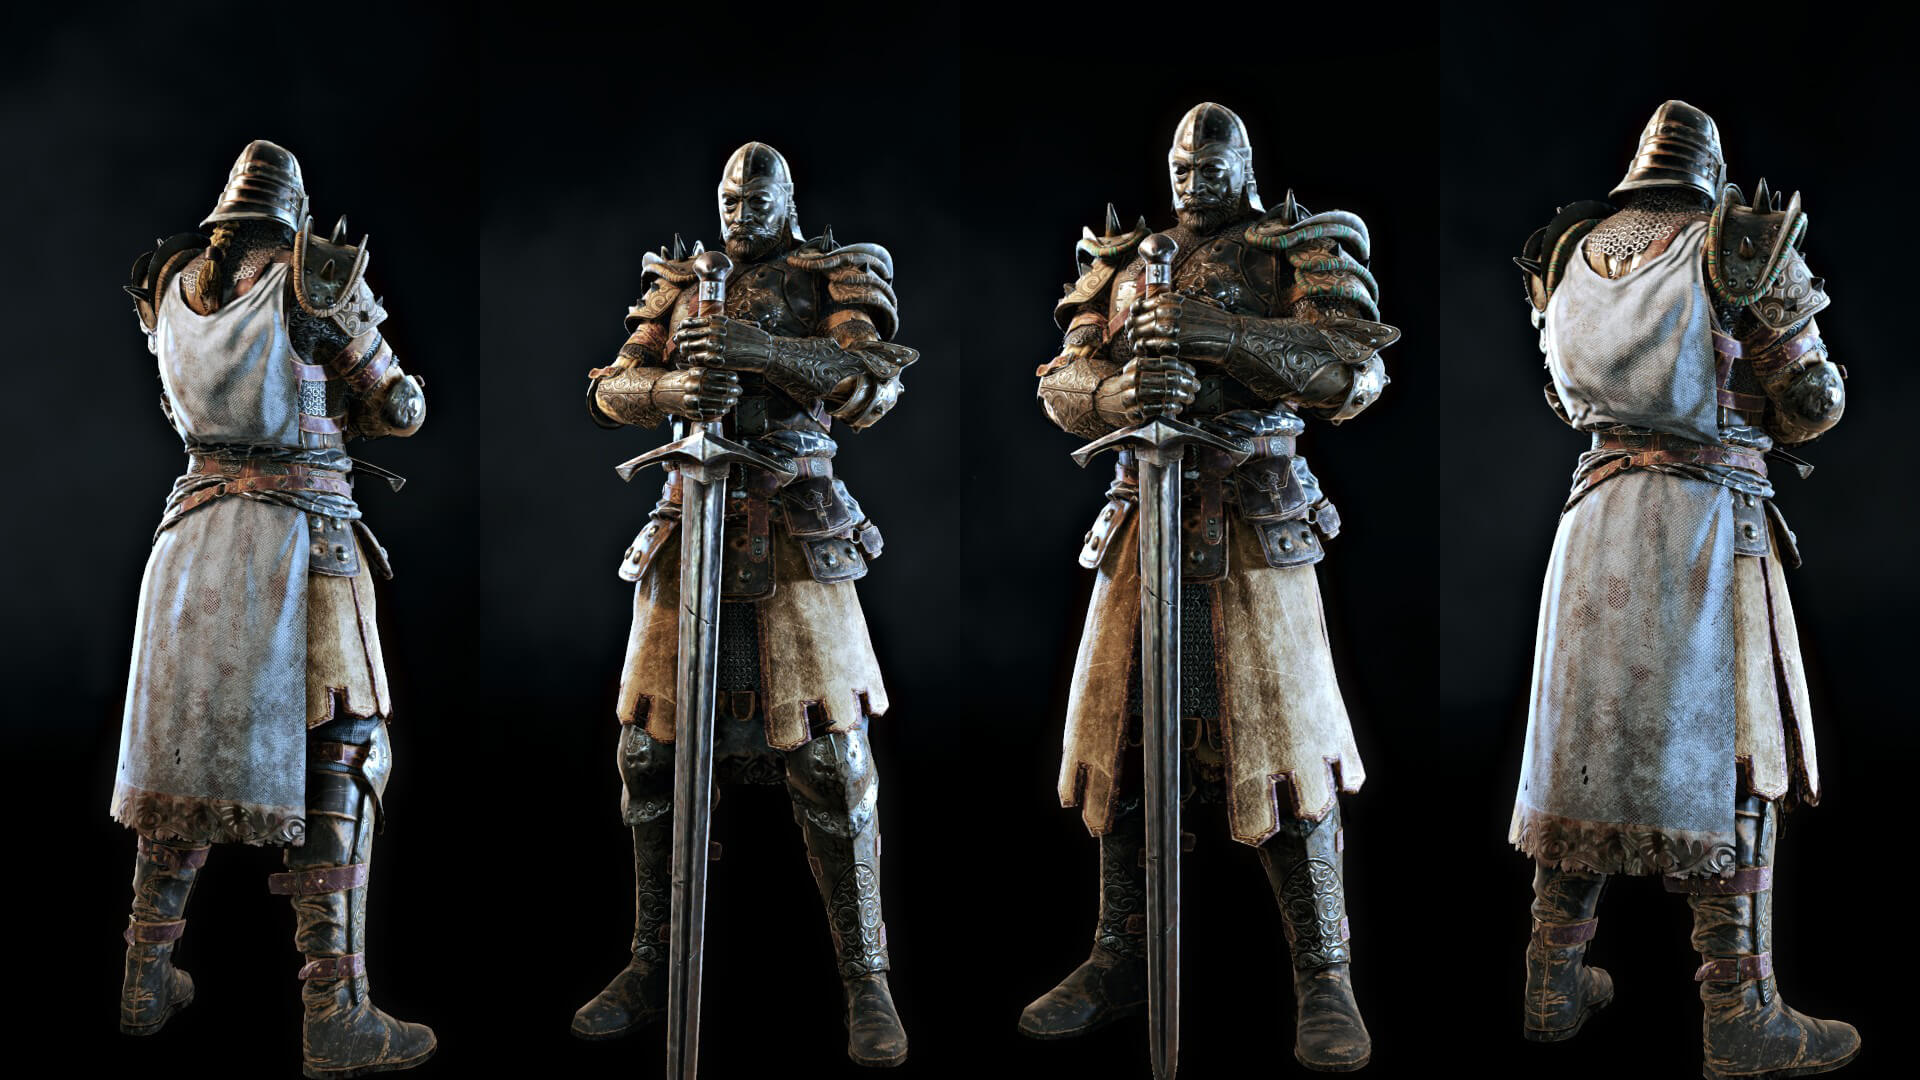 pics For Honor Tiandi Armor Sets welcome for fashion v2.